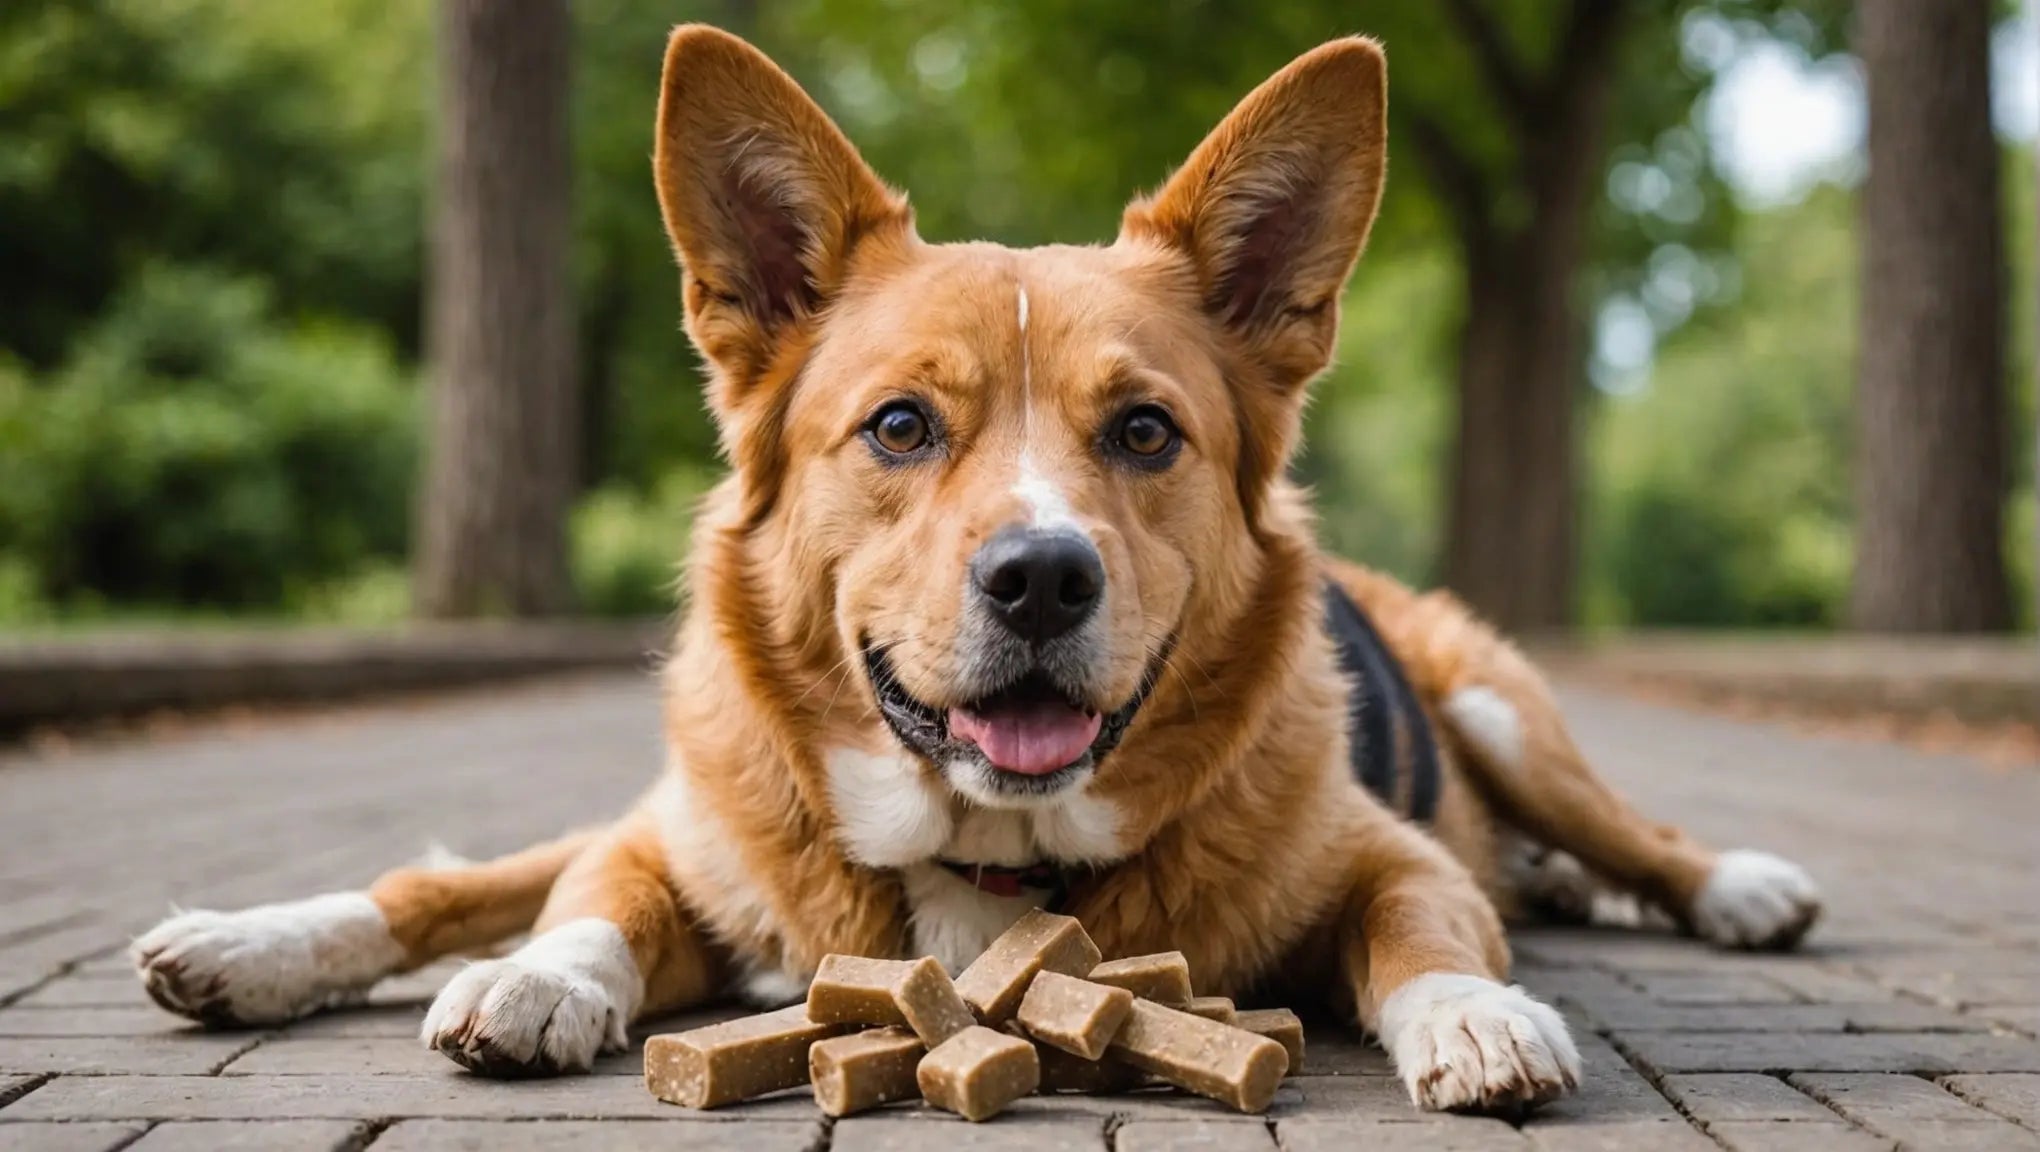 Satisfy Your Dog's Chewing Needs with High-Quality Dog Chew Treats